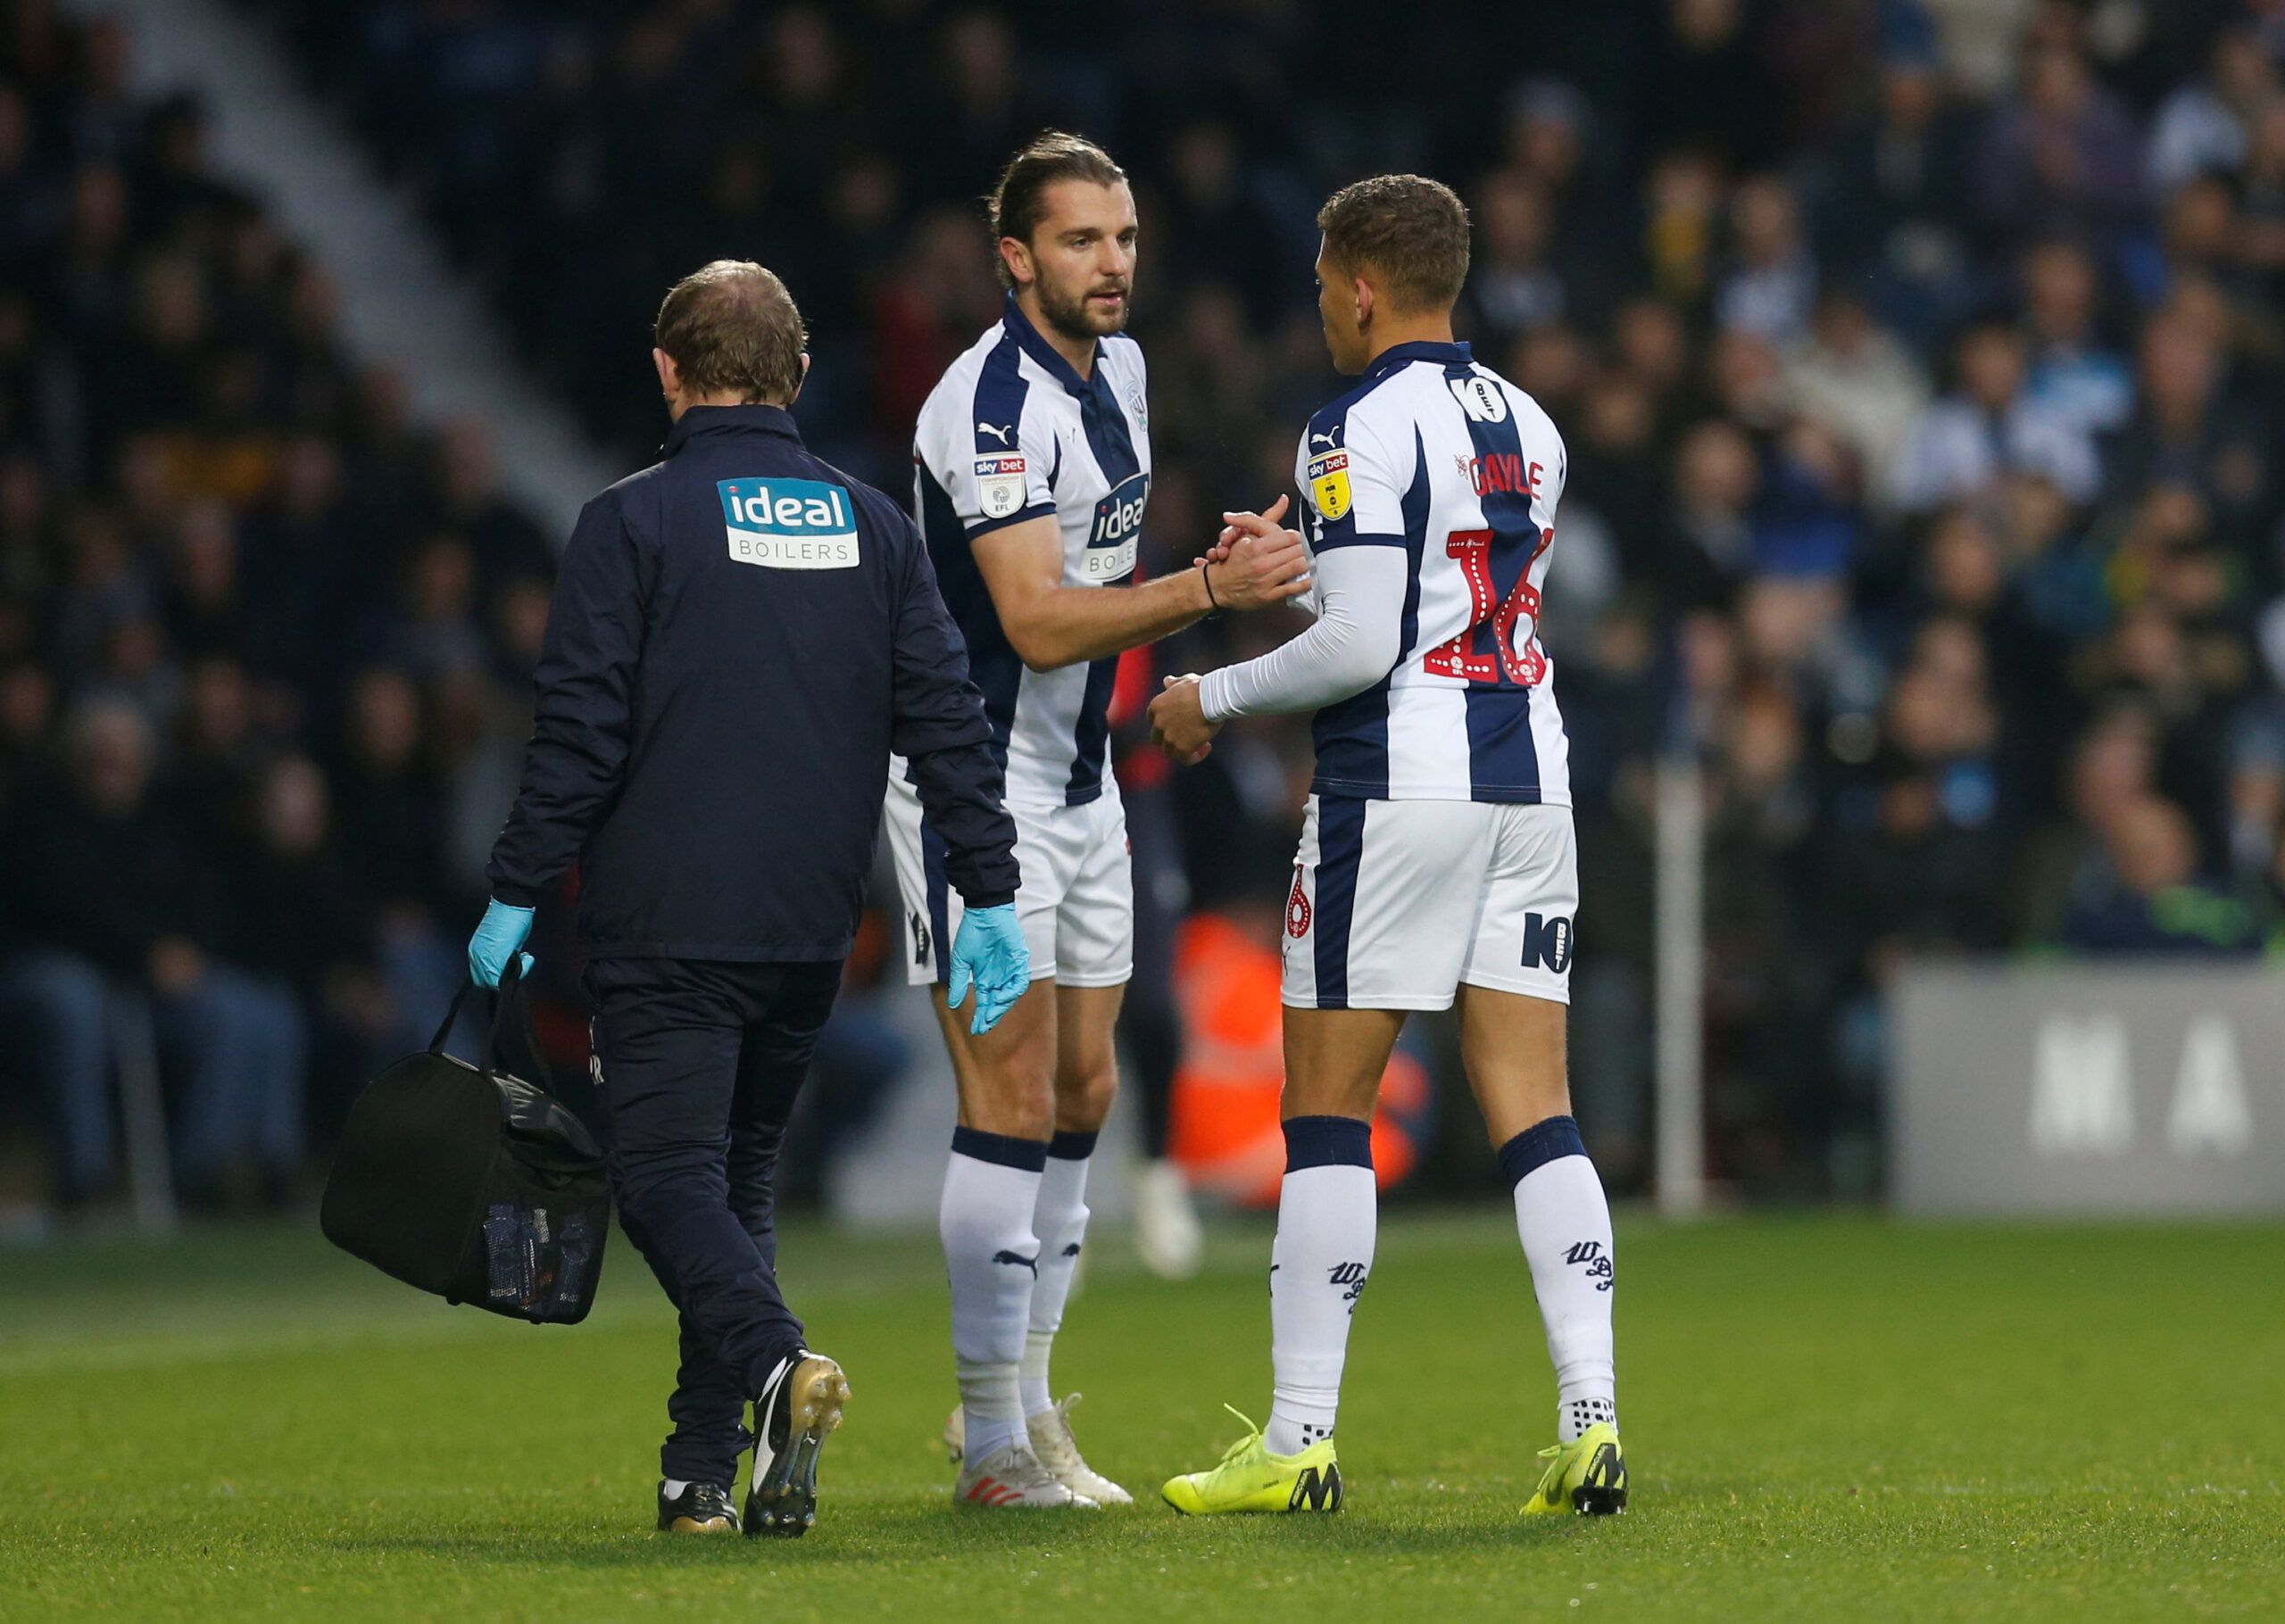 Soccer Football - Championship - West Bromwich Albion v Wigan Athletic - The Hawthorns, West Bromwich, Britain - December 26, 2018  West Bromwich Albion's Dwight Gayle with Jay Rodriguez as he leaves the pitch after sustaining an injury  Action Images/Ed Sykes  EDITORIAL USE ONLY. No use with unauthorized audio, video, data, fixture lists, club/league logos or 